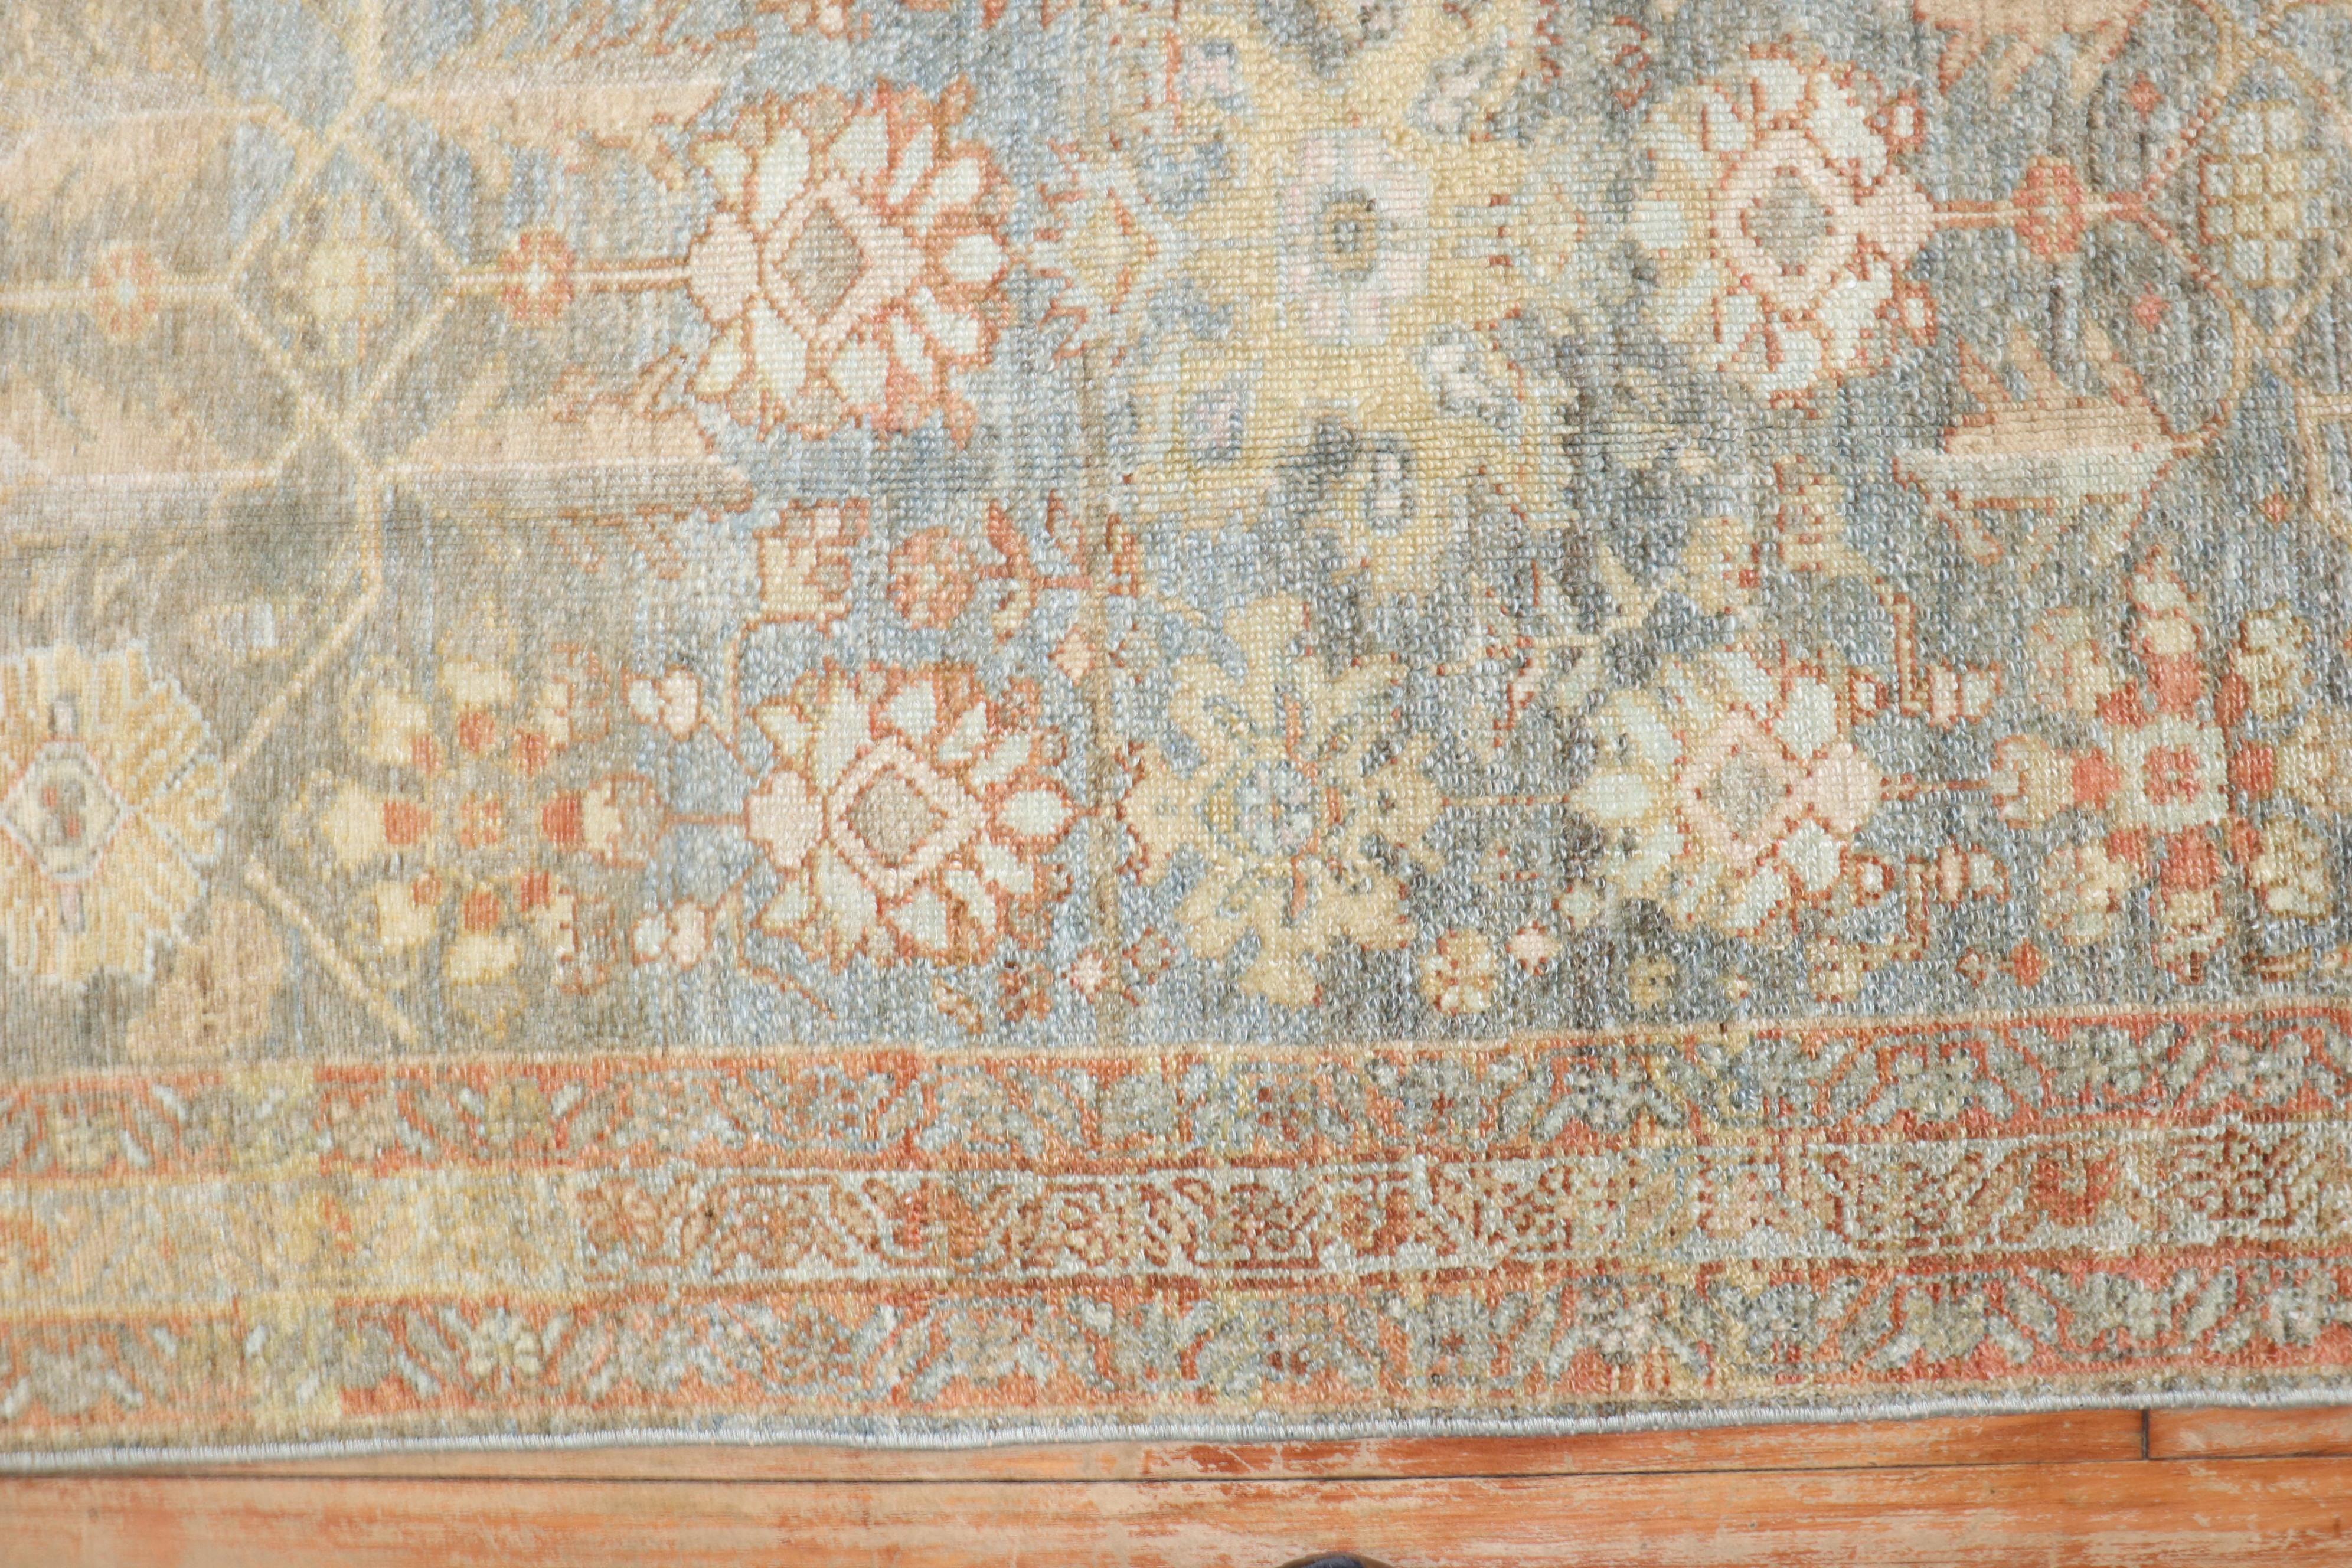 A scatter size early 20th century Persian Malayer rug in washed-out neutral tones

Measures: 2'10